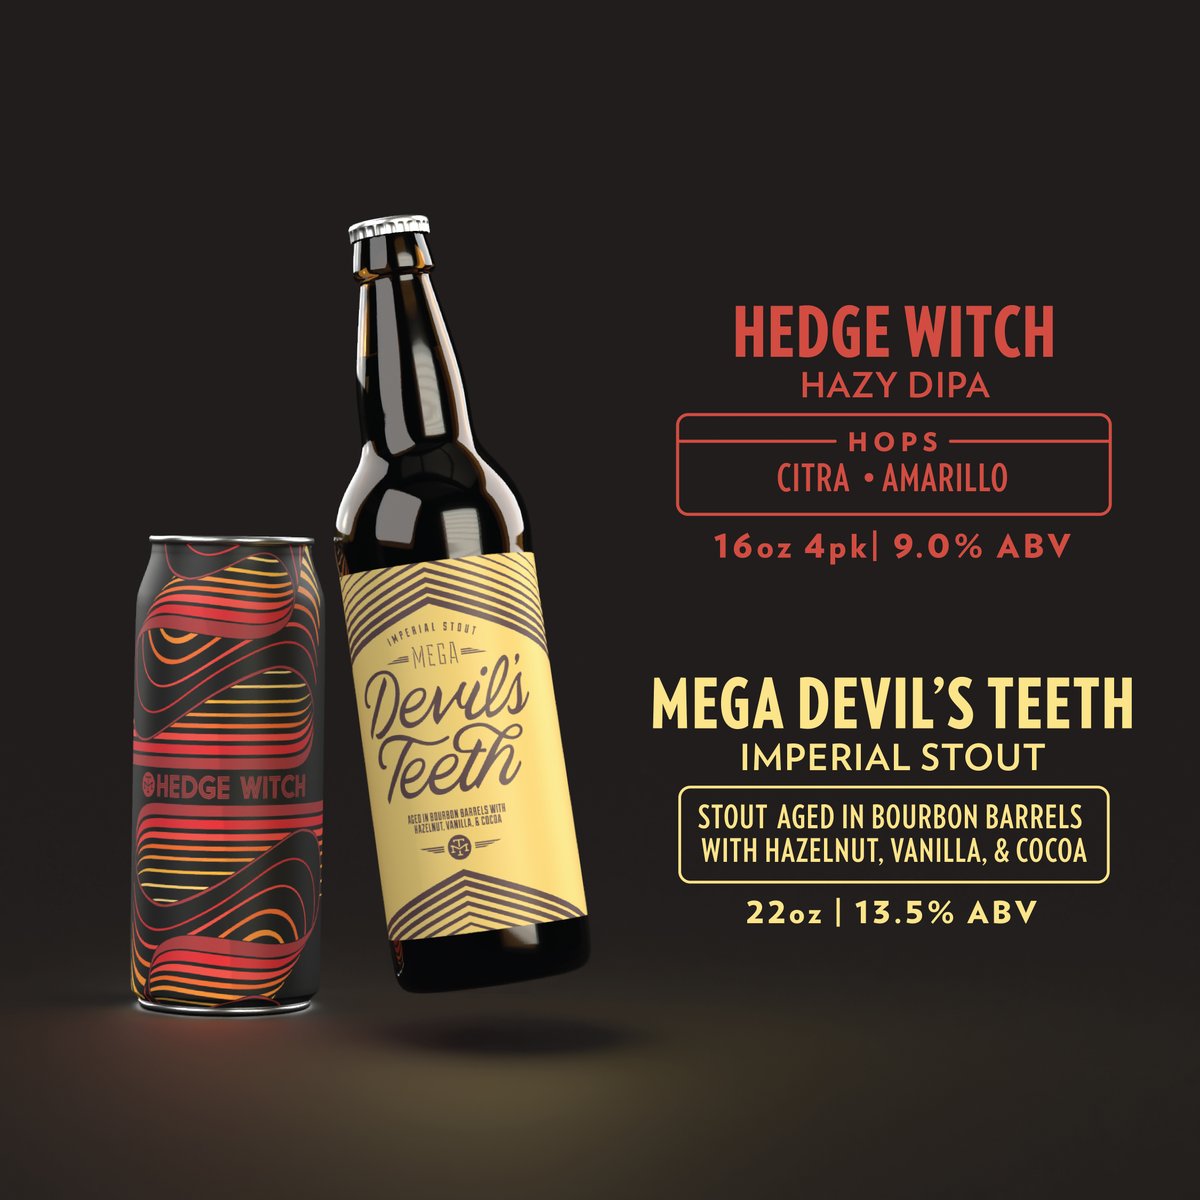 ON SALE NOW. We have some really tasty beers on sale now on the site. Quantities are limited. The sale page is here: moderntimesmerch.com/collections/be…